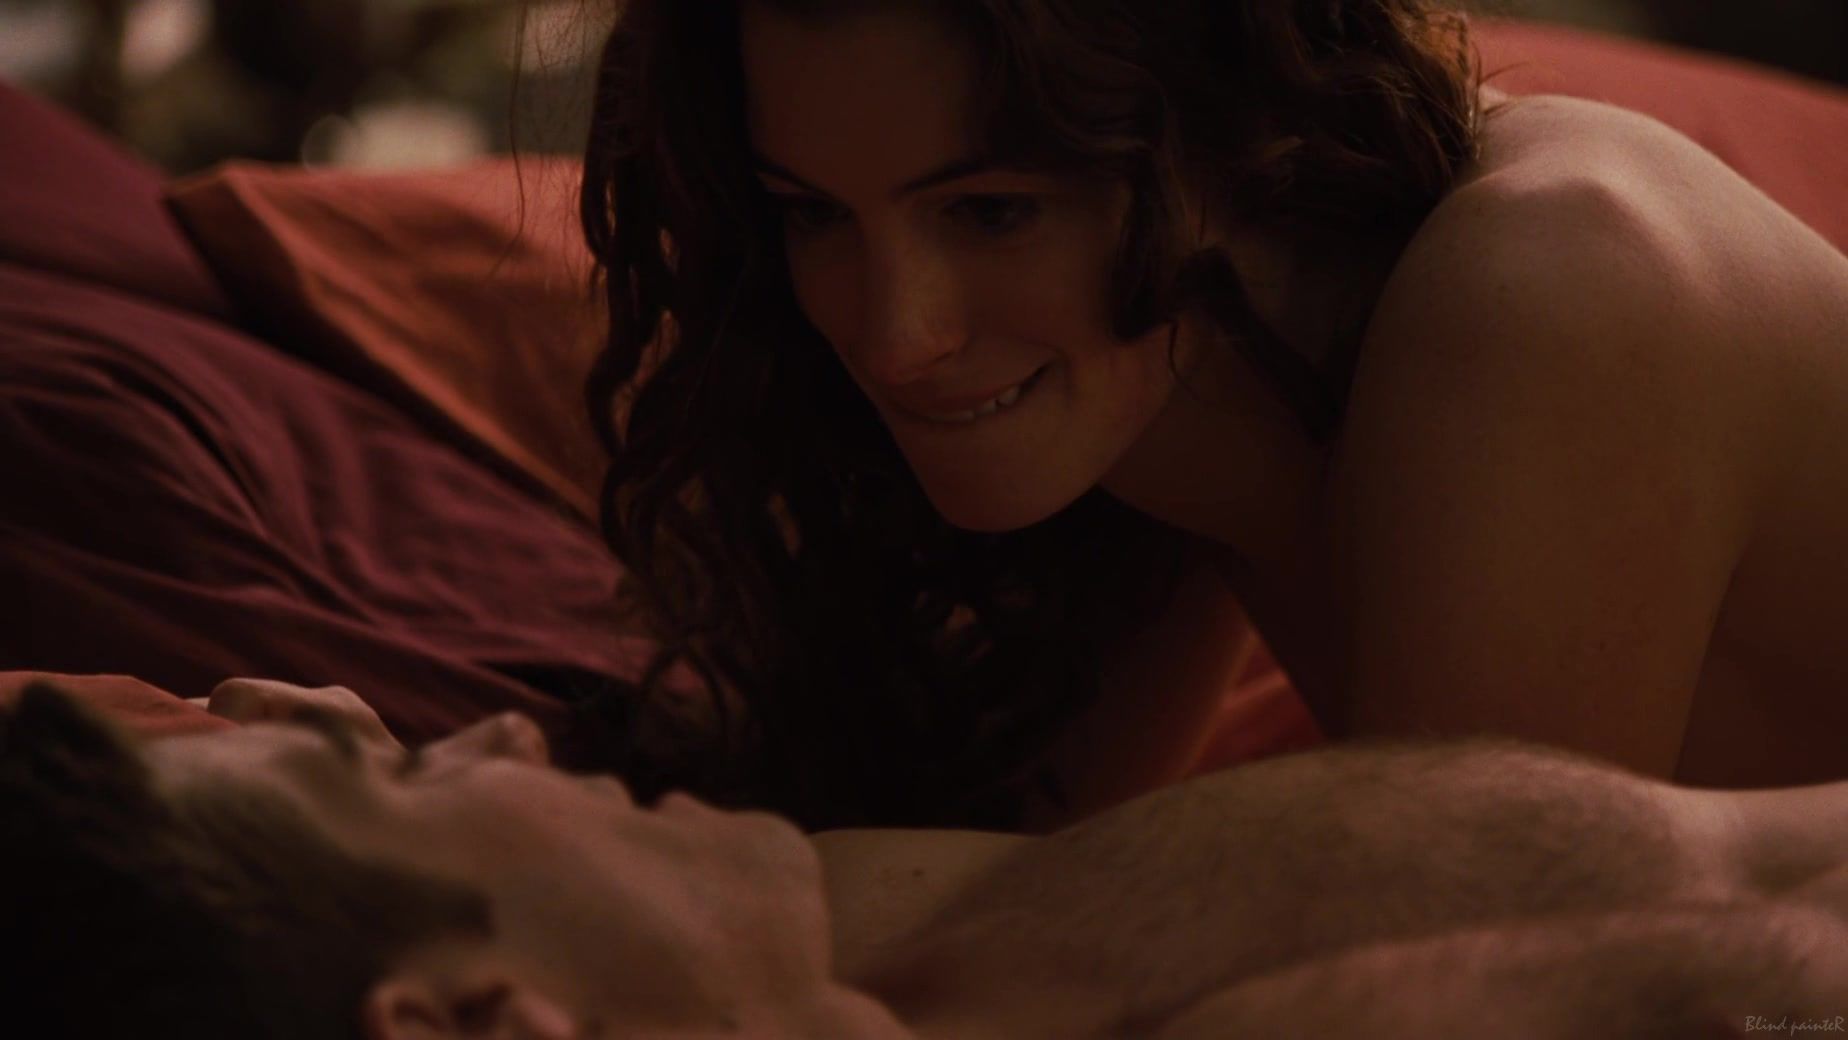 Gay Boy Porn Sex video Anne Hathaway nude - Love and Other Drugs (2010) ImagEarn - 1